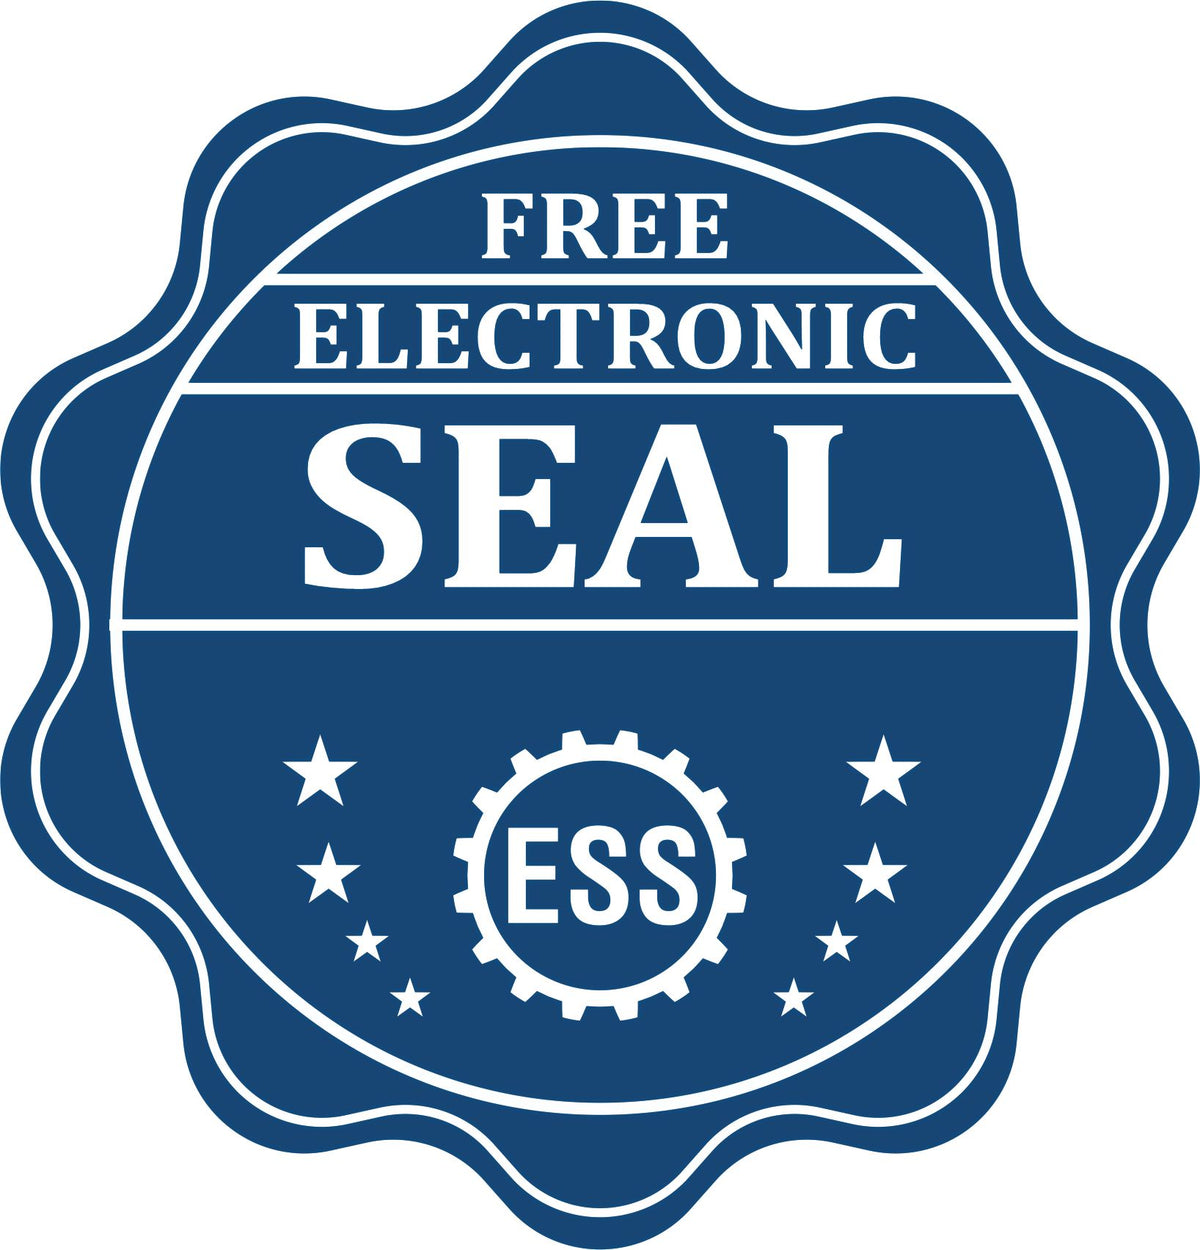 A badge showing a free electronic seal for the Gift New Jersey Geologist Seal with stars and the ESS gear on the emblem.